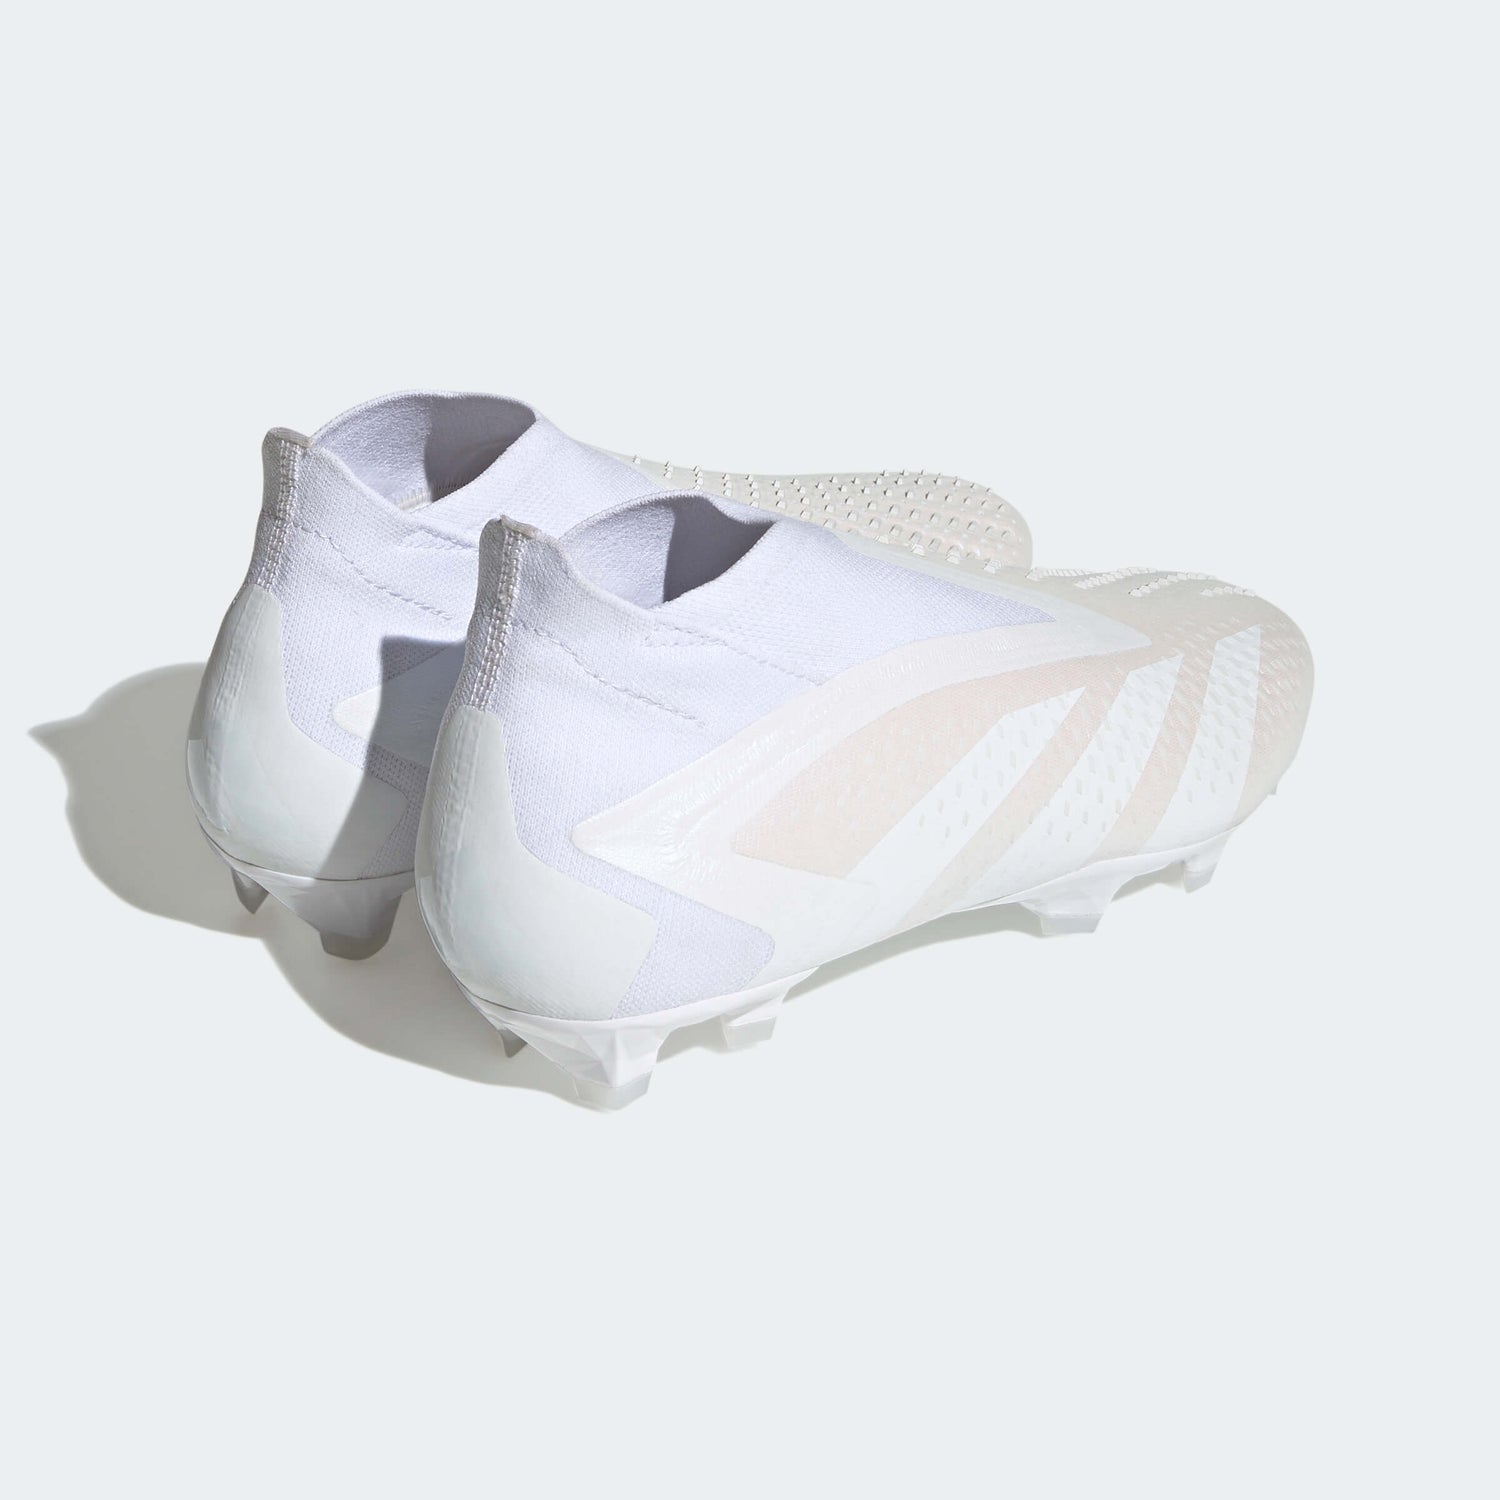 Adidas Predator Accuracy + FG - Pearlized Pack (SP23) (Pair - Back Lateral)